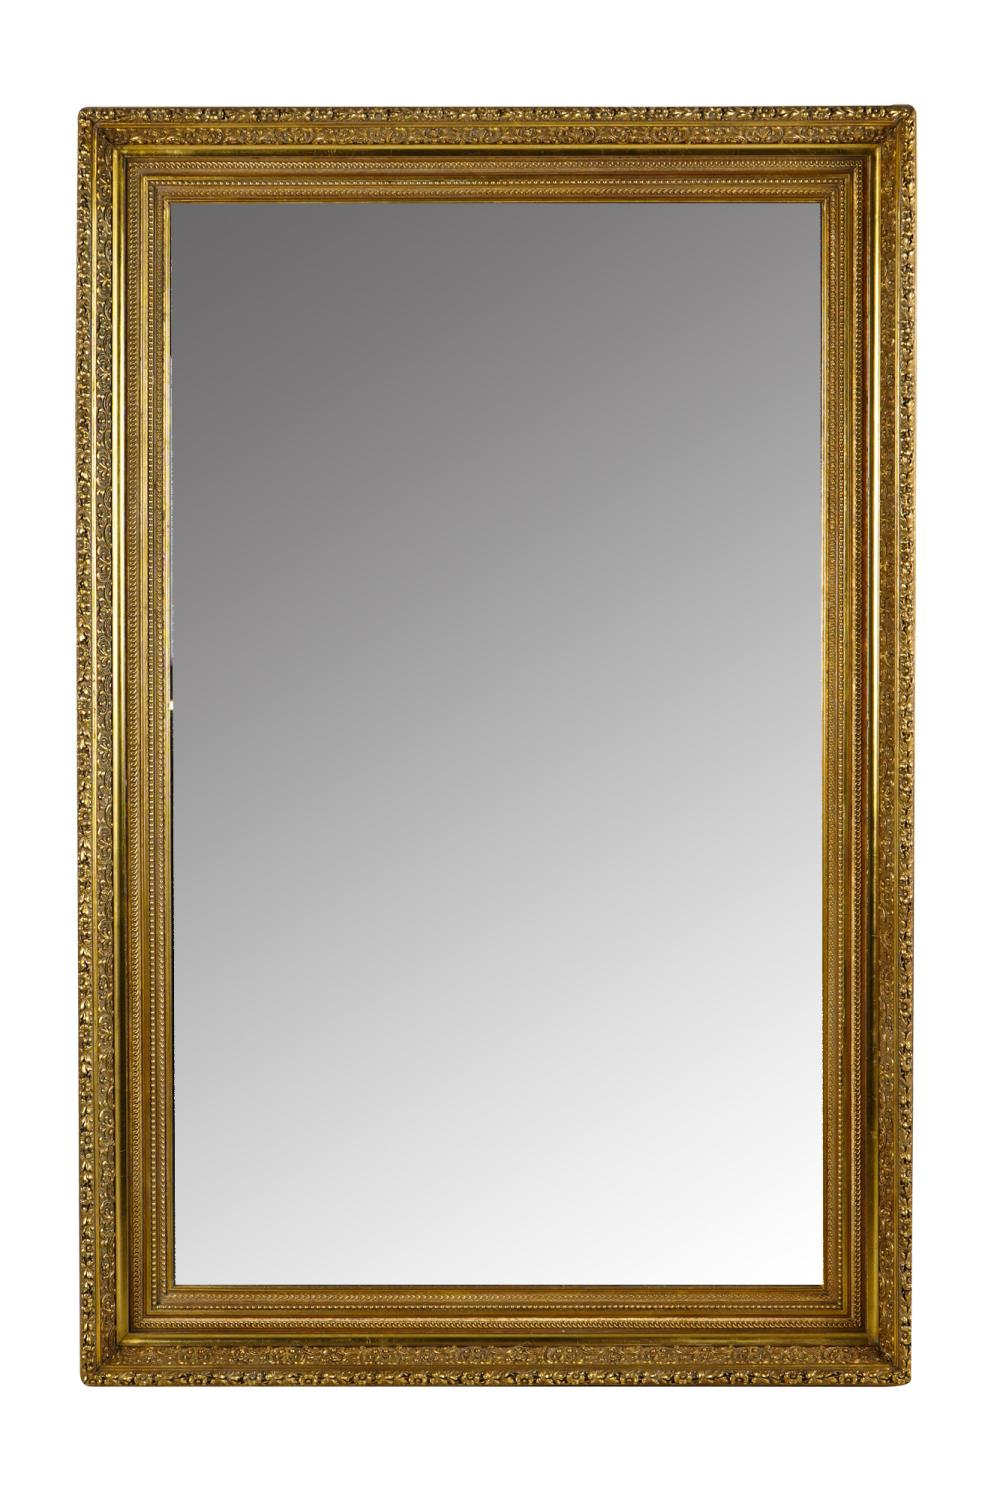 CARVED GILT WOOD WALL MIRRORwith 33679f